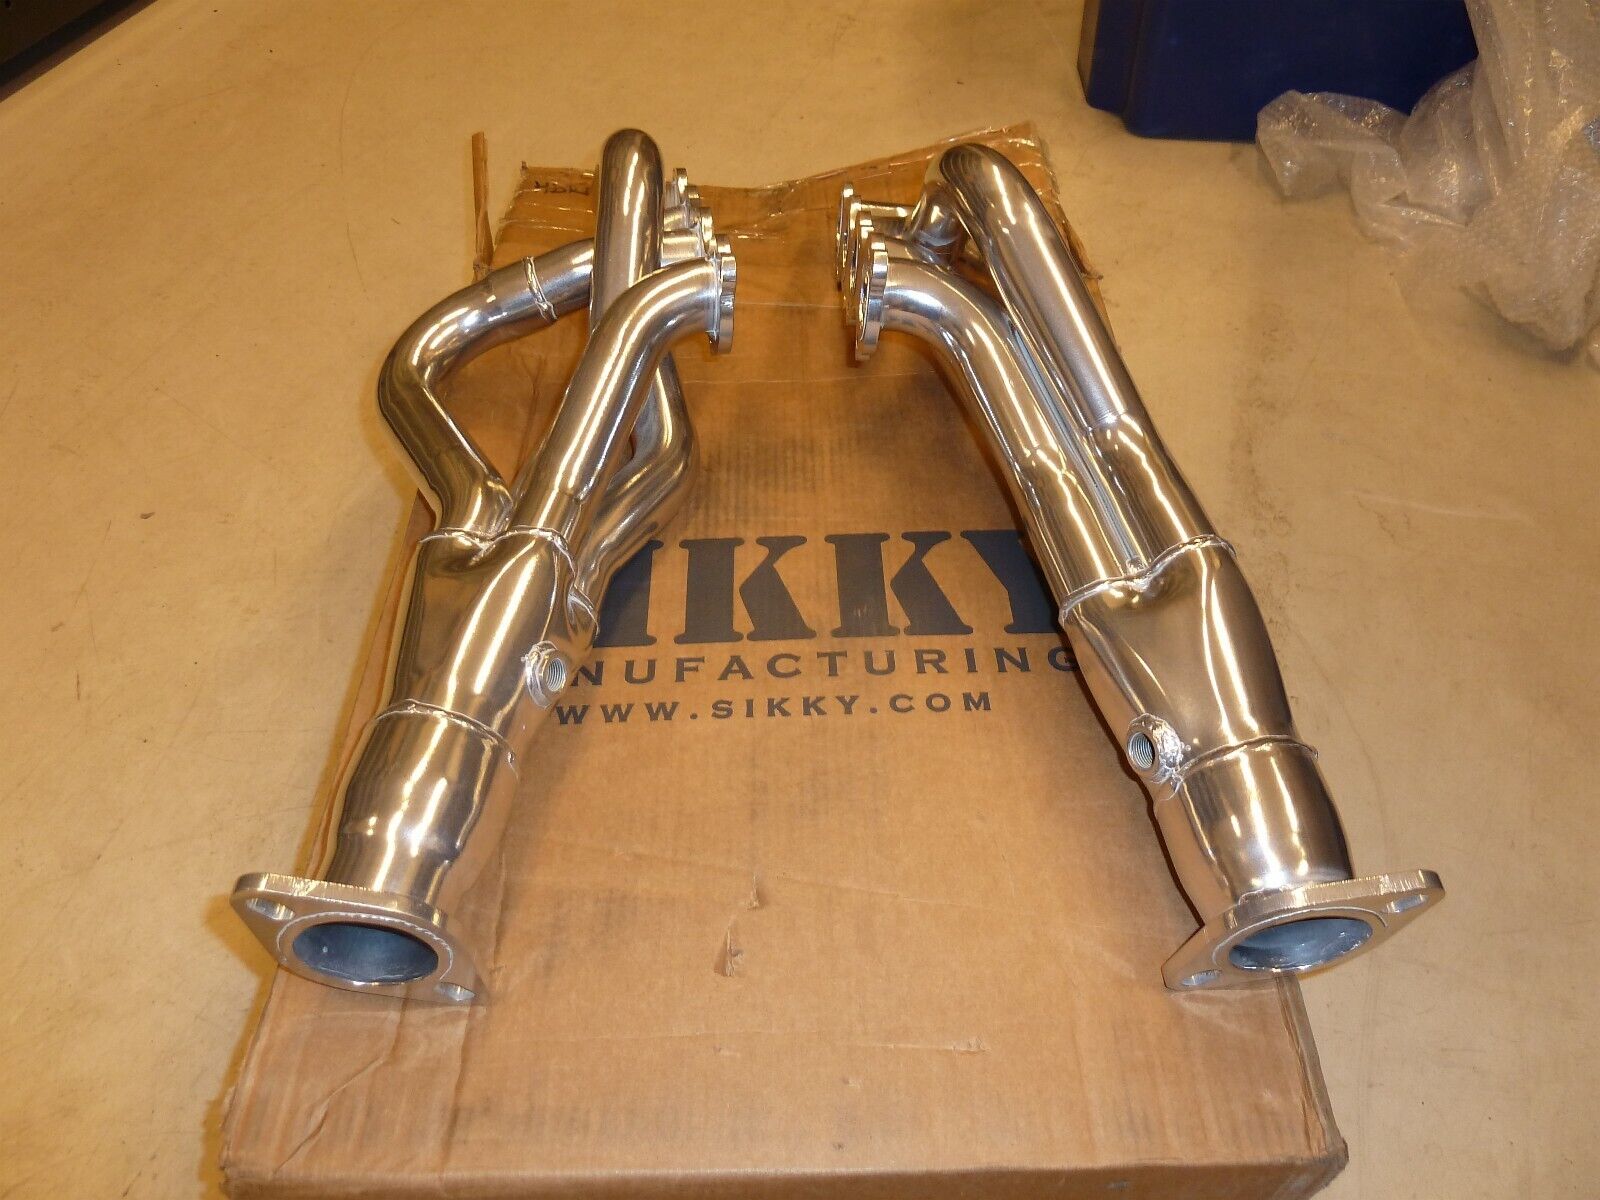 Sikky headers for Lexus IS-F